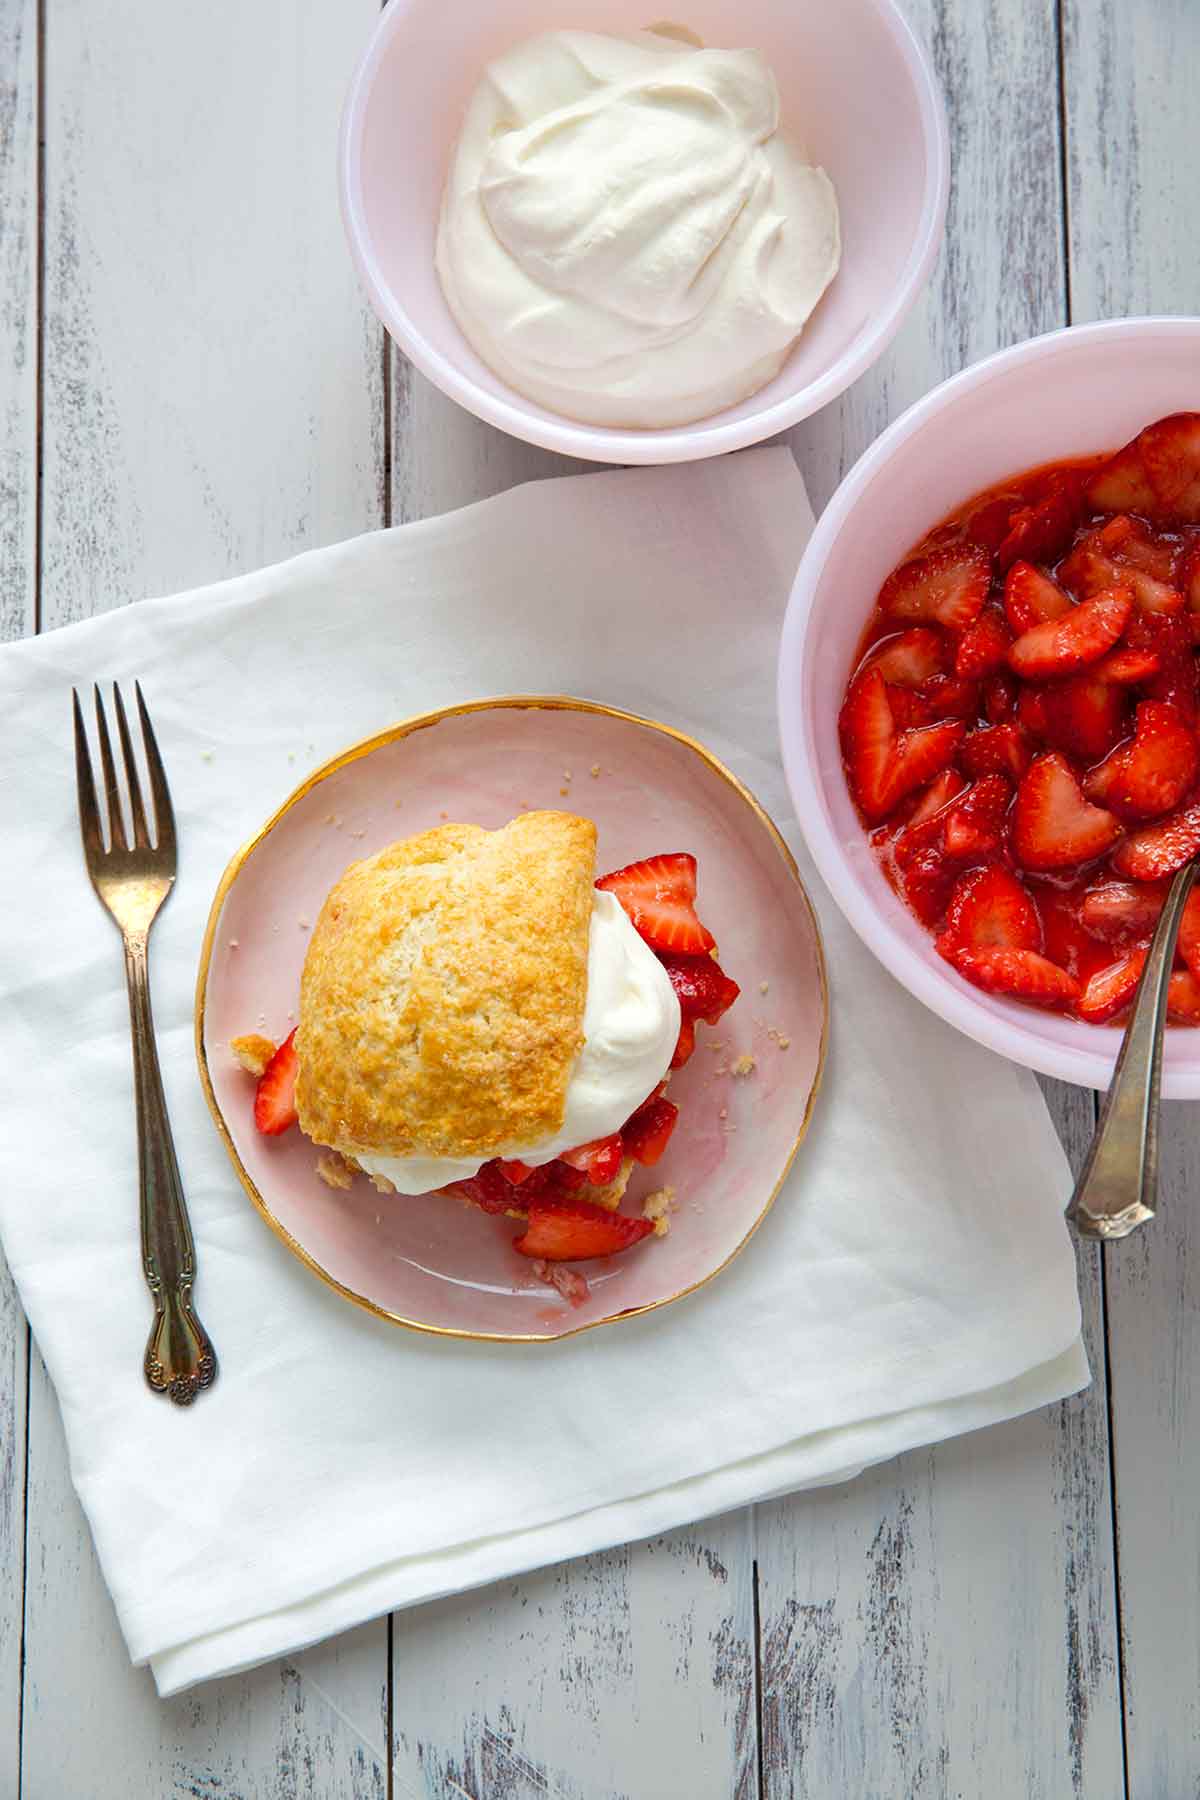 A strawberry shortcake on a pink plate with a bowl of strawberries and a bowl of cream beside it.